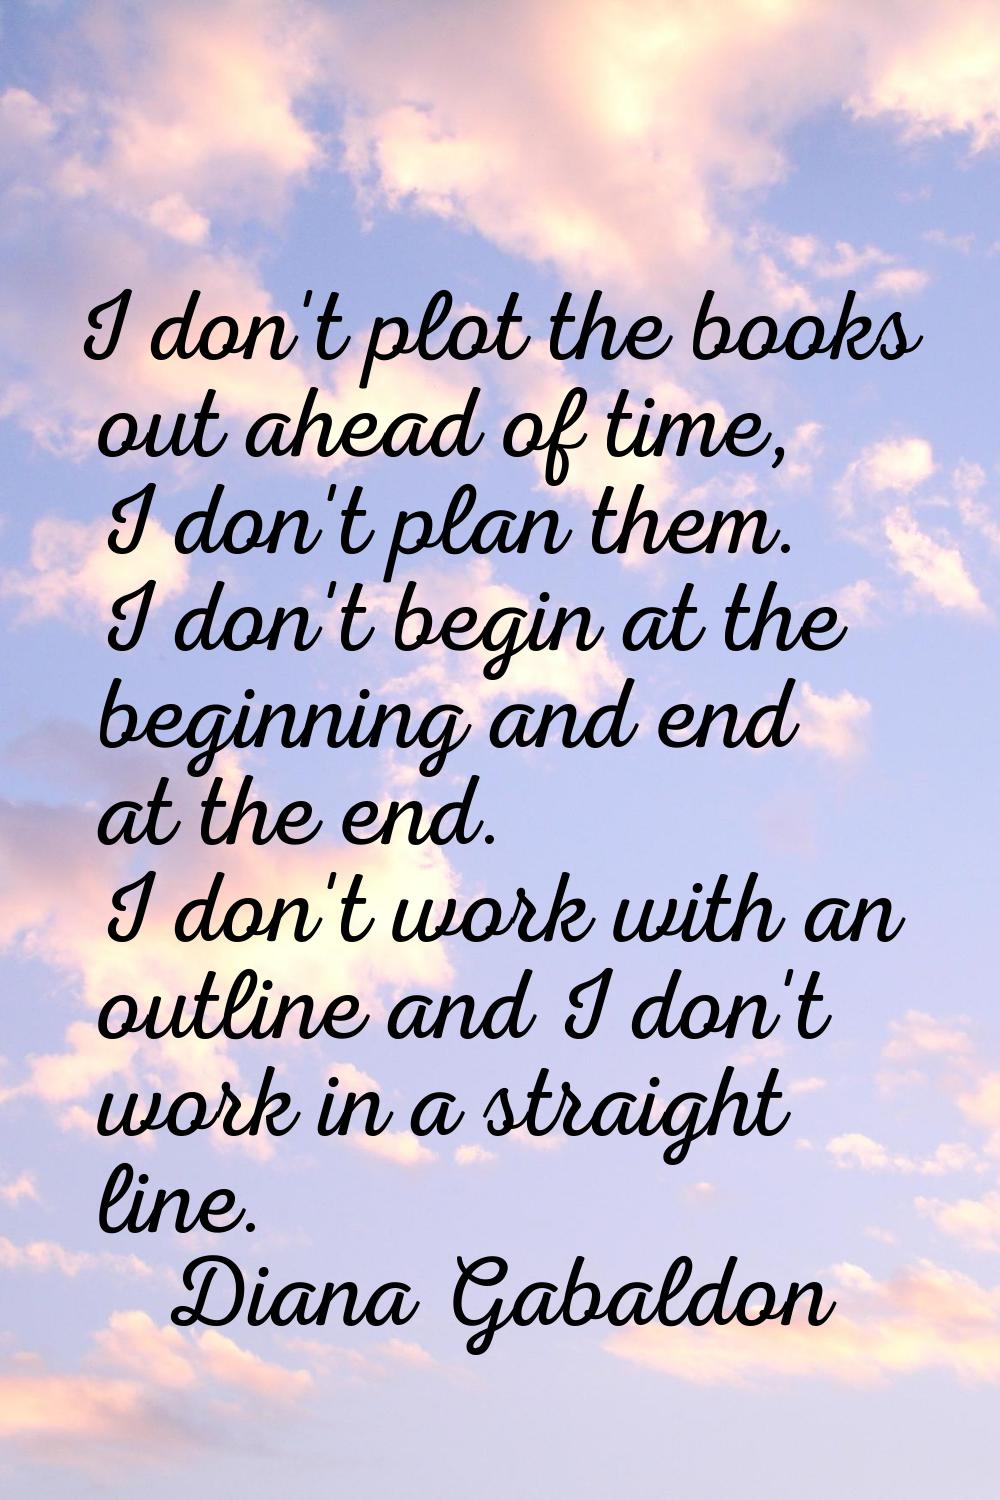 I don't plot the books out ahead of time, I don't plan them. I don't begin at the beginning and end